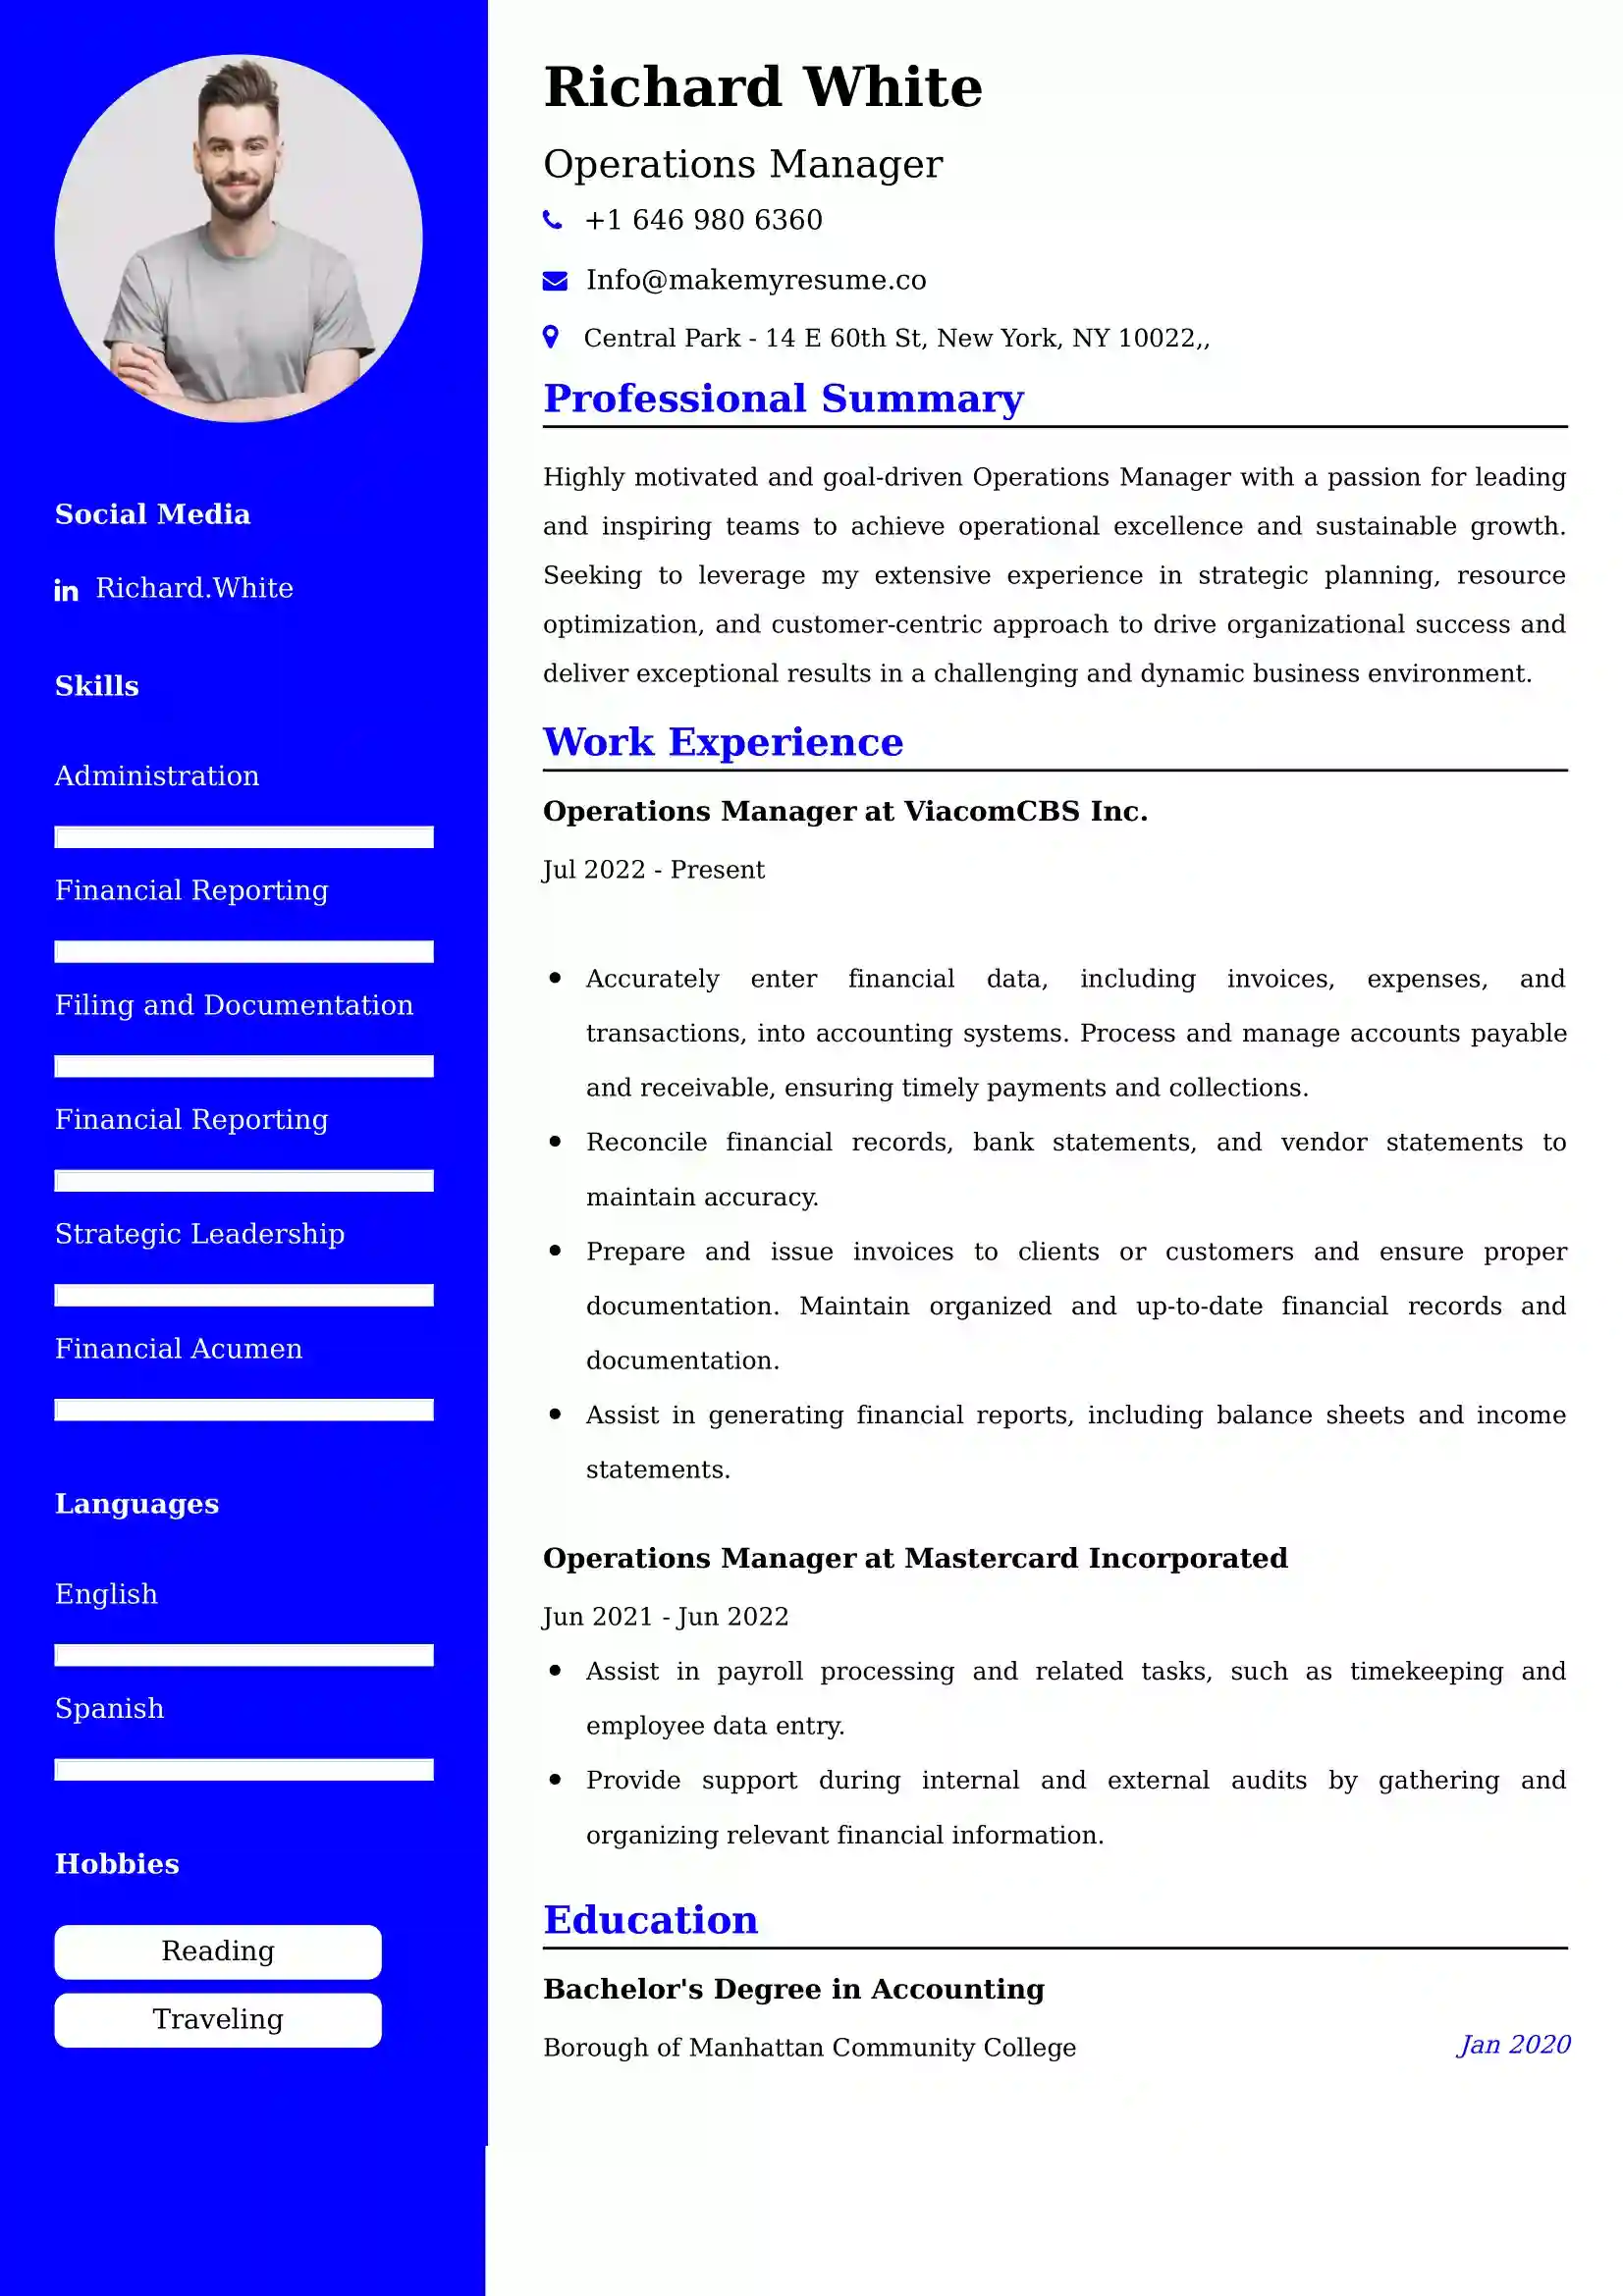 Operations Manager Resume Examples - Brazilian Format, Latest Template